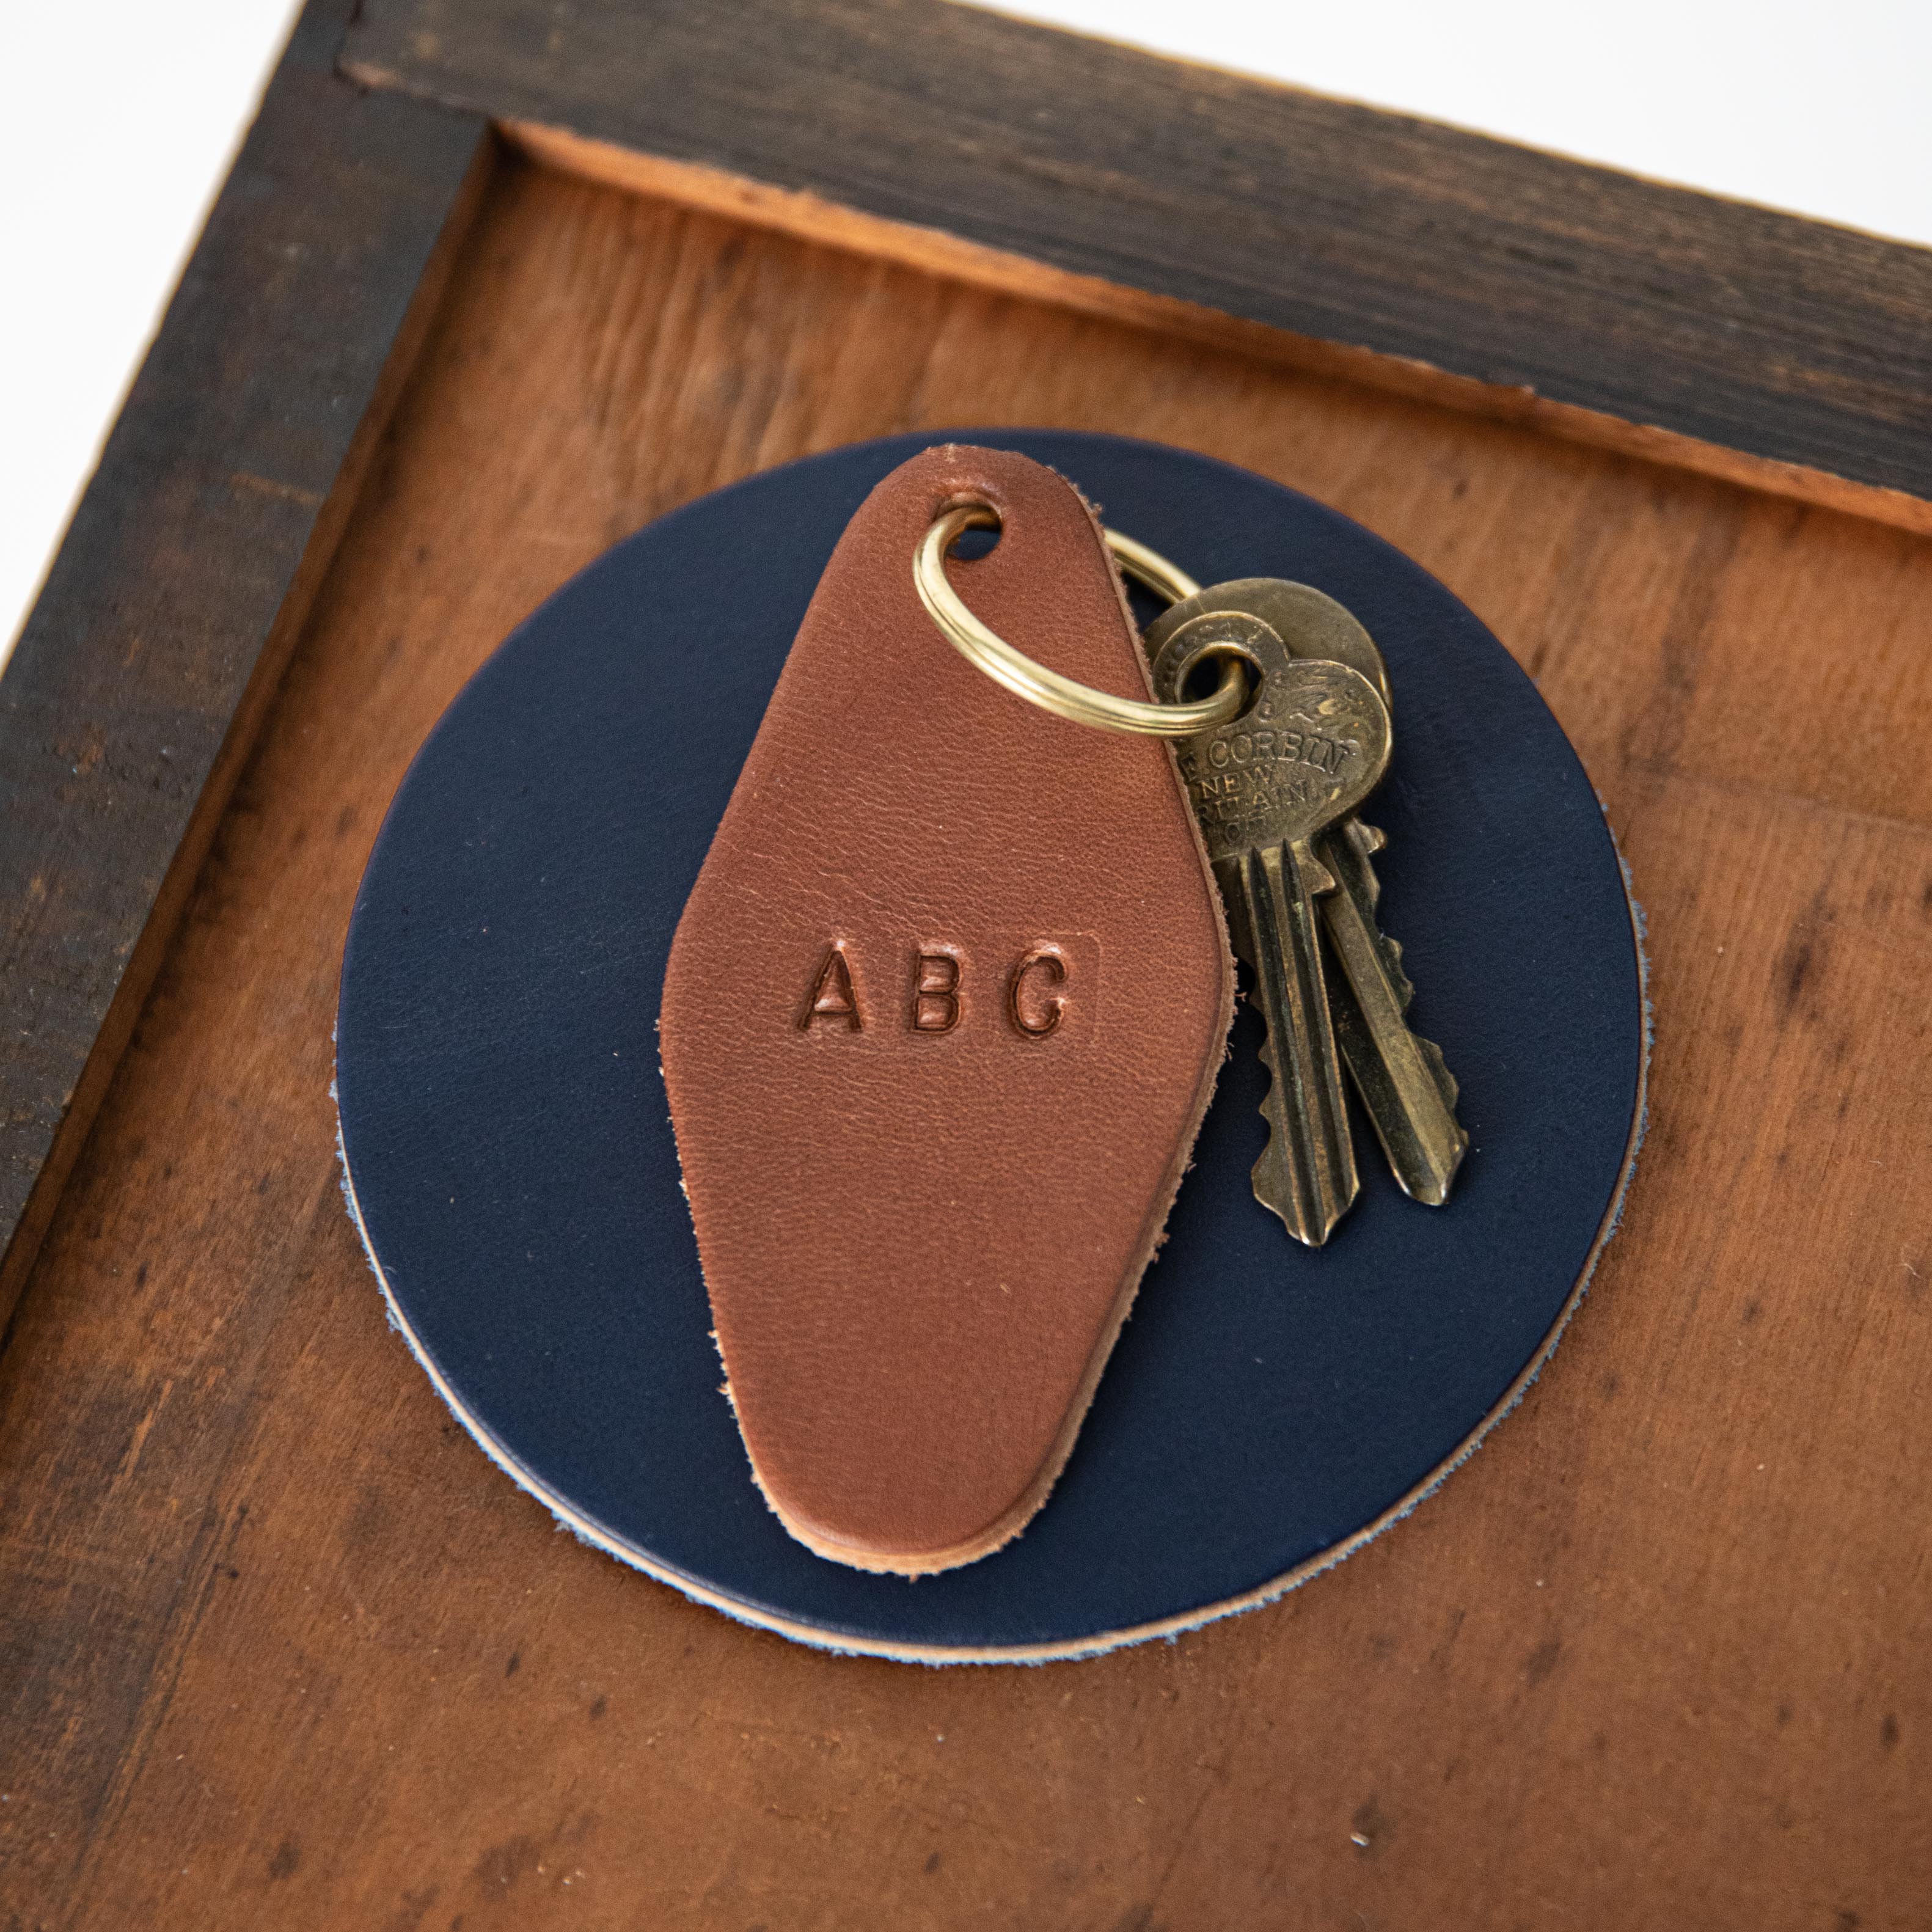 Vegetable Tanned Hotel Key Fob- leather keychain - leather key holder - leather key fob - KMM &amp; Co.